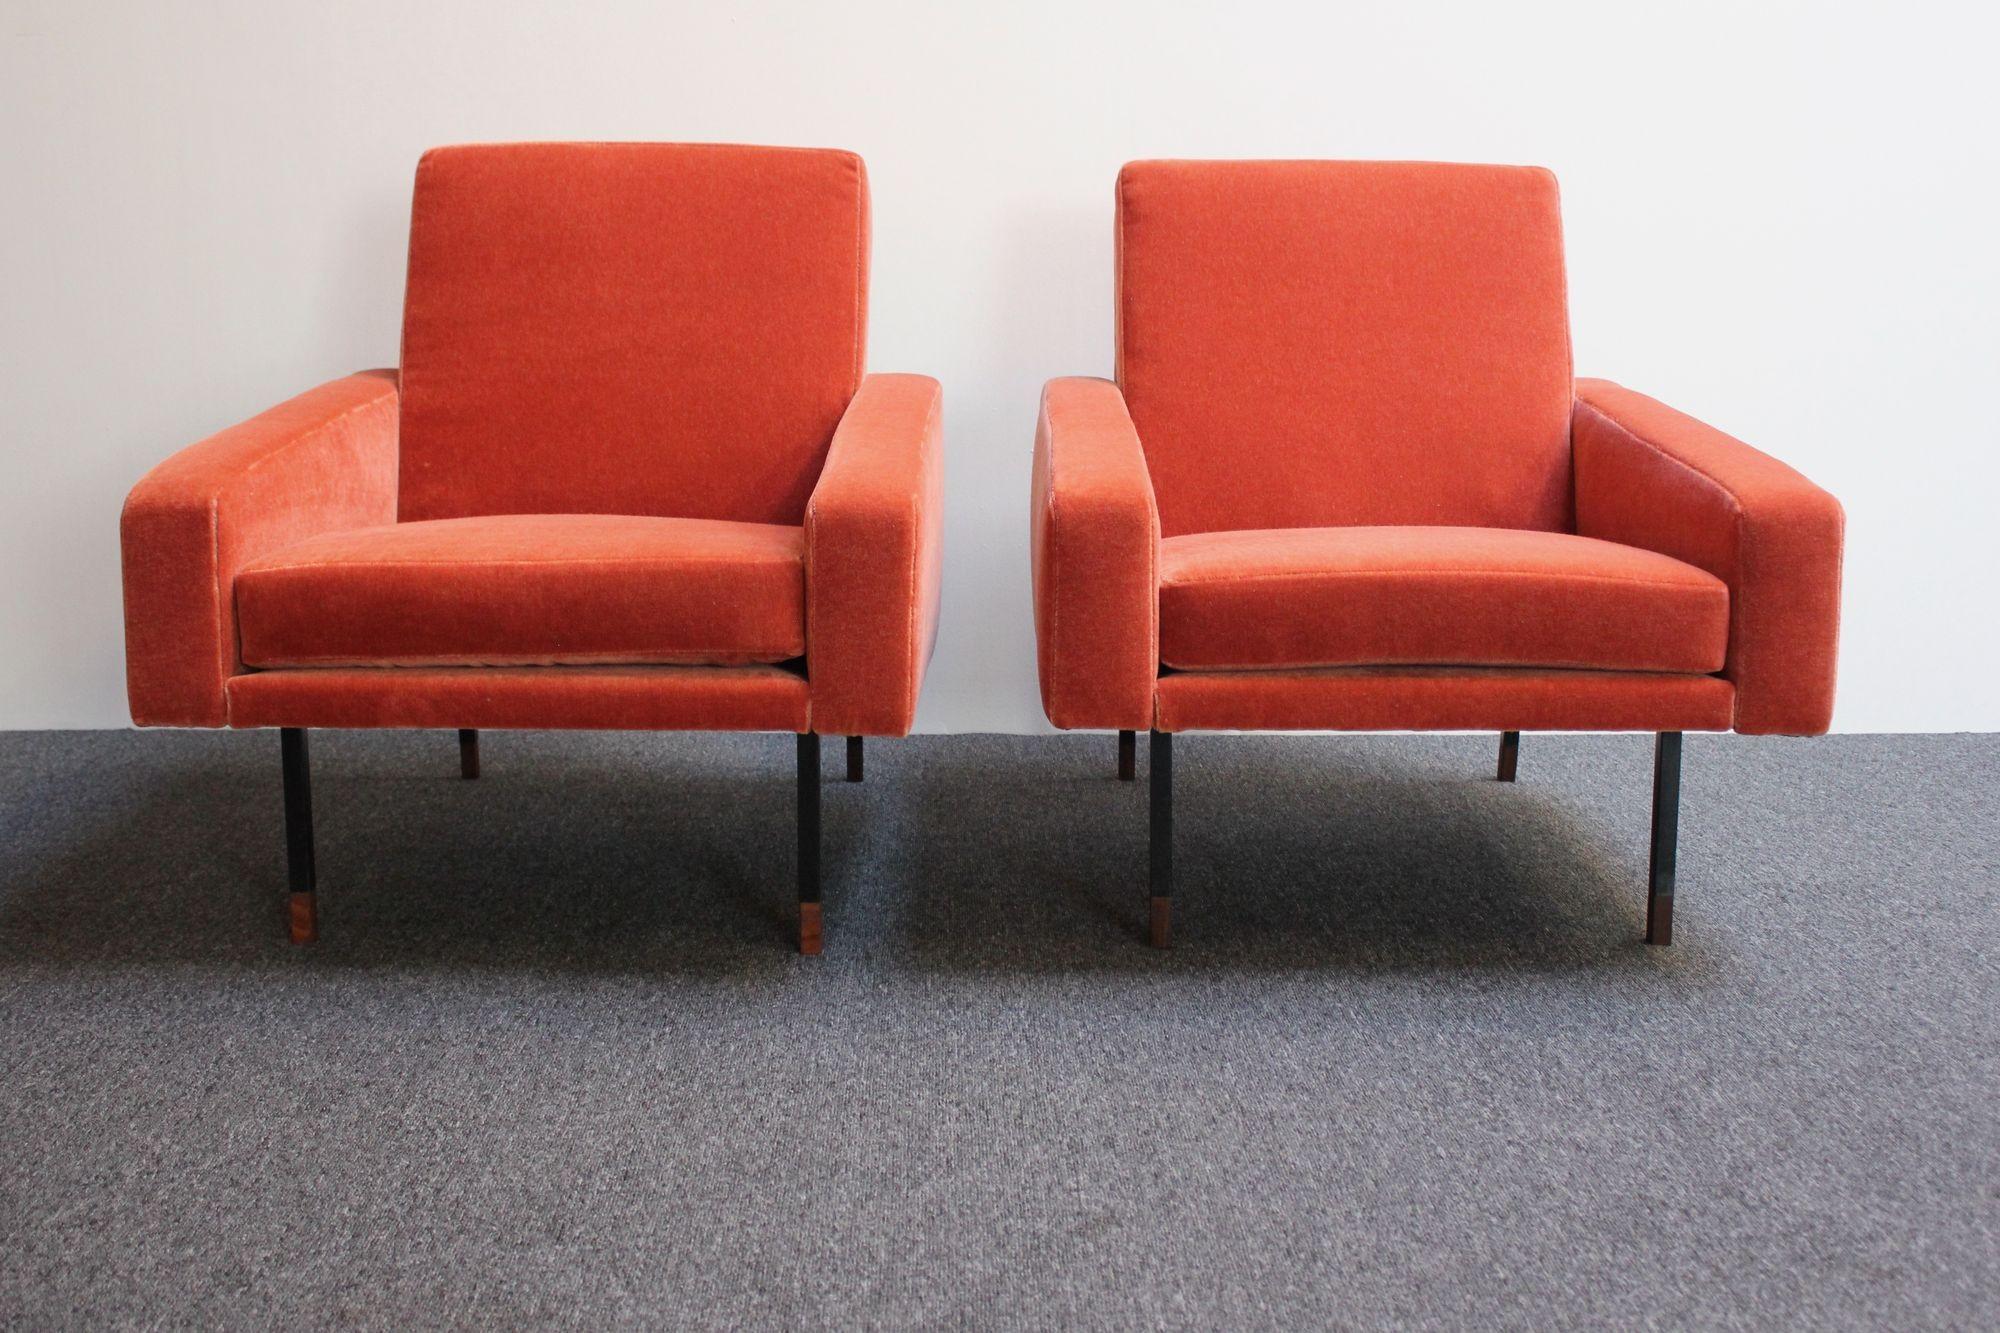 Pair of Italian Modernist Metal and Mohair Lounge Chairs by Campo and Graffi For Sale 8